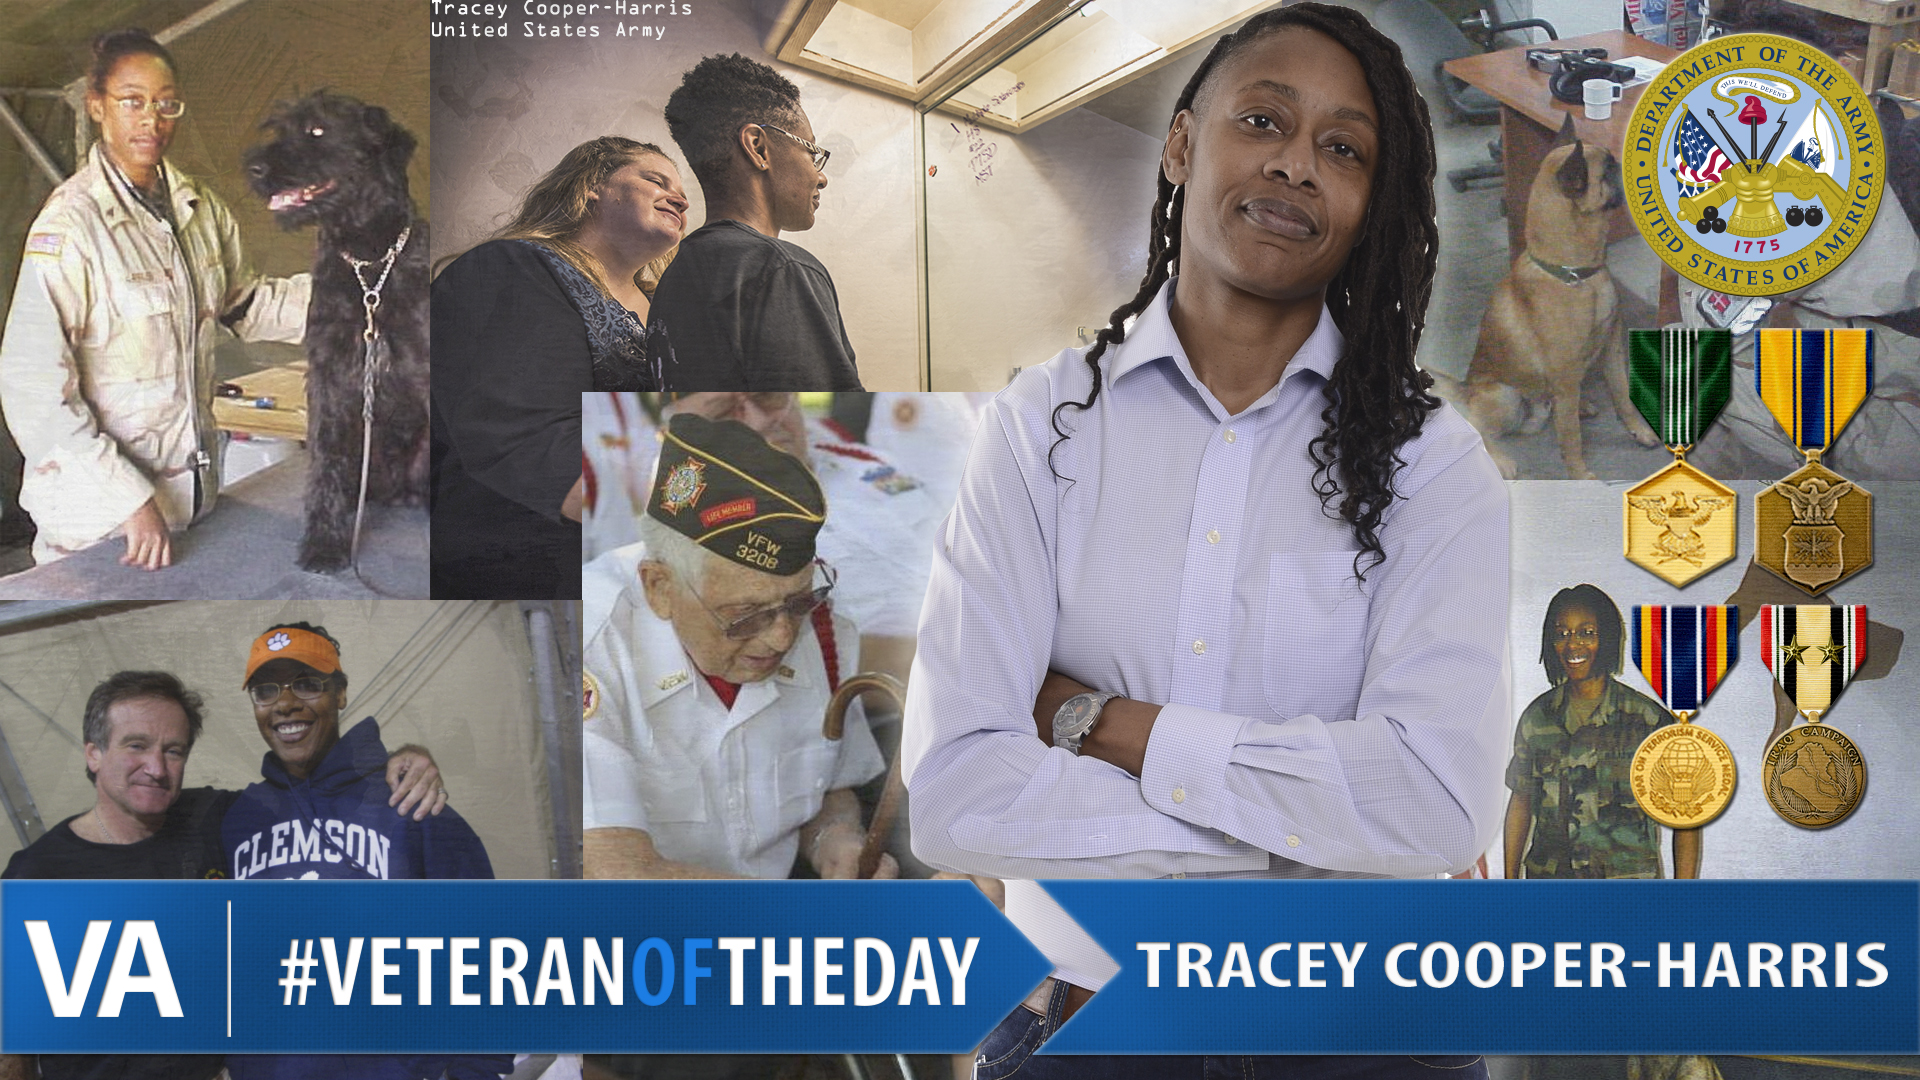 Tracey Cooper-Harris - Veteran of the Day